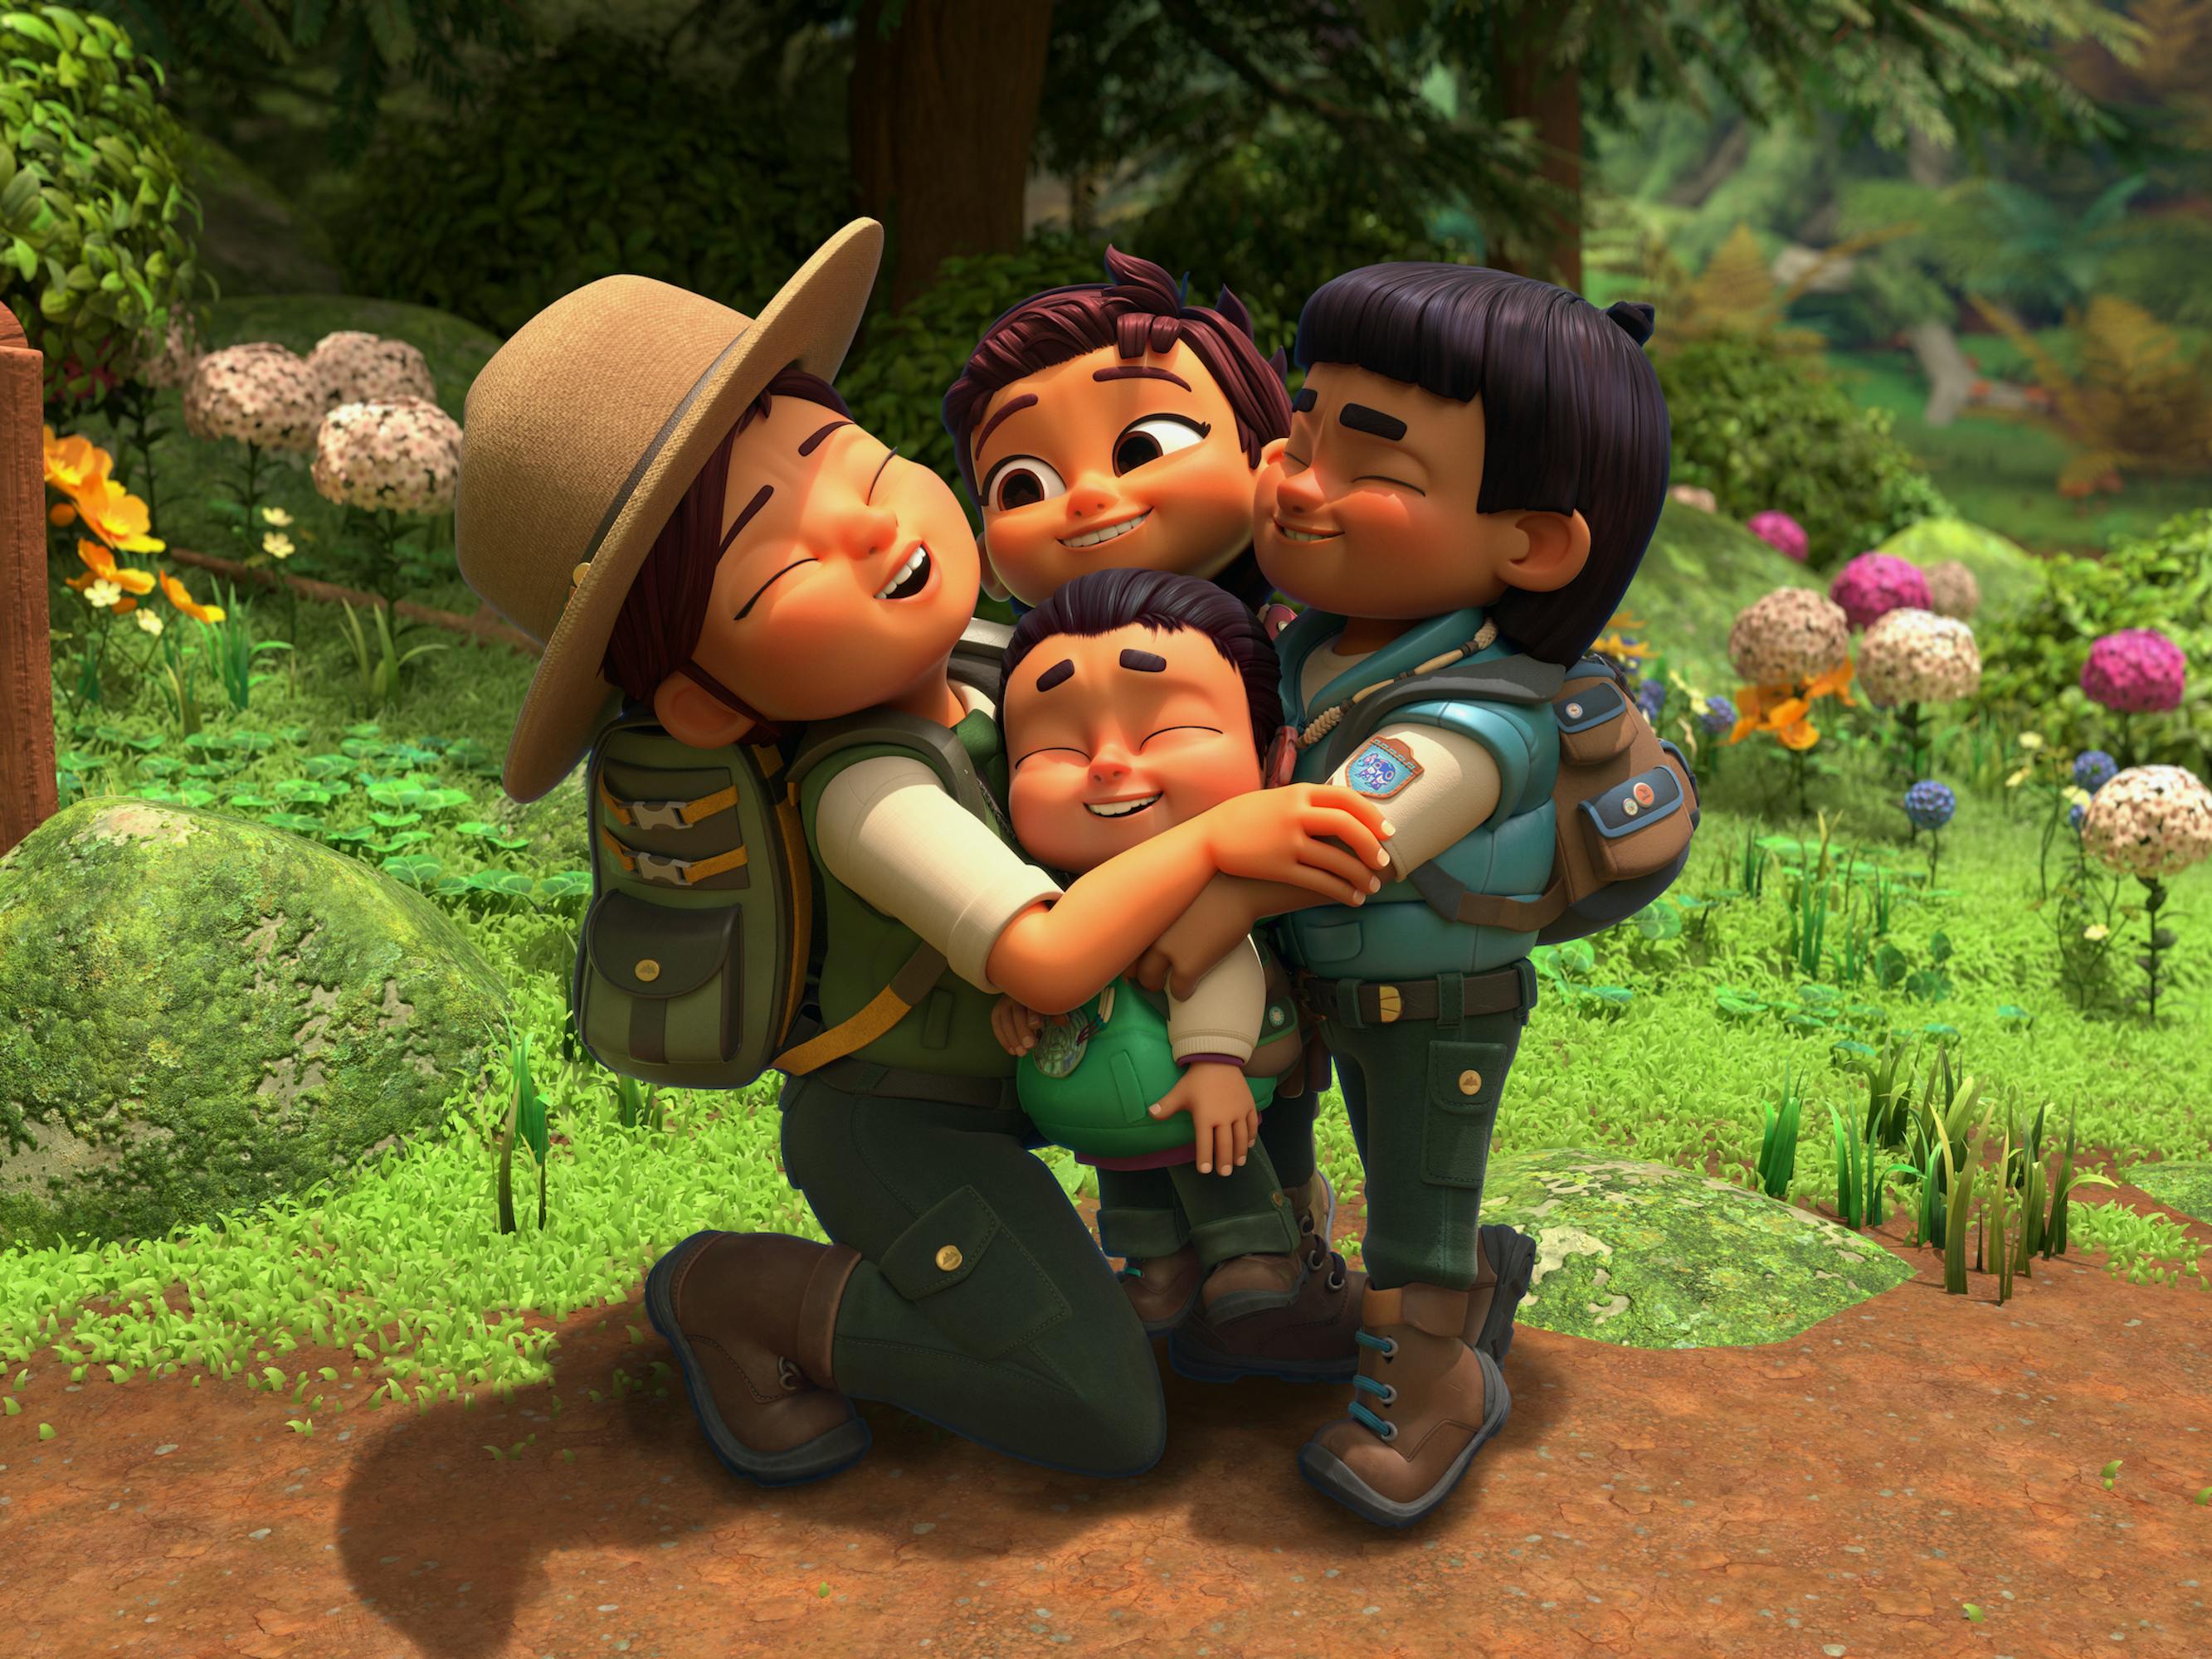 Mom gives her junior rangers a hug. Behind them is a green field dotted with pink and white flowers.